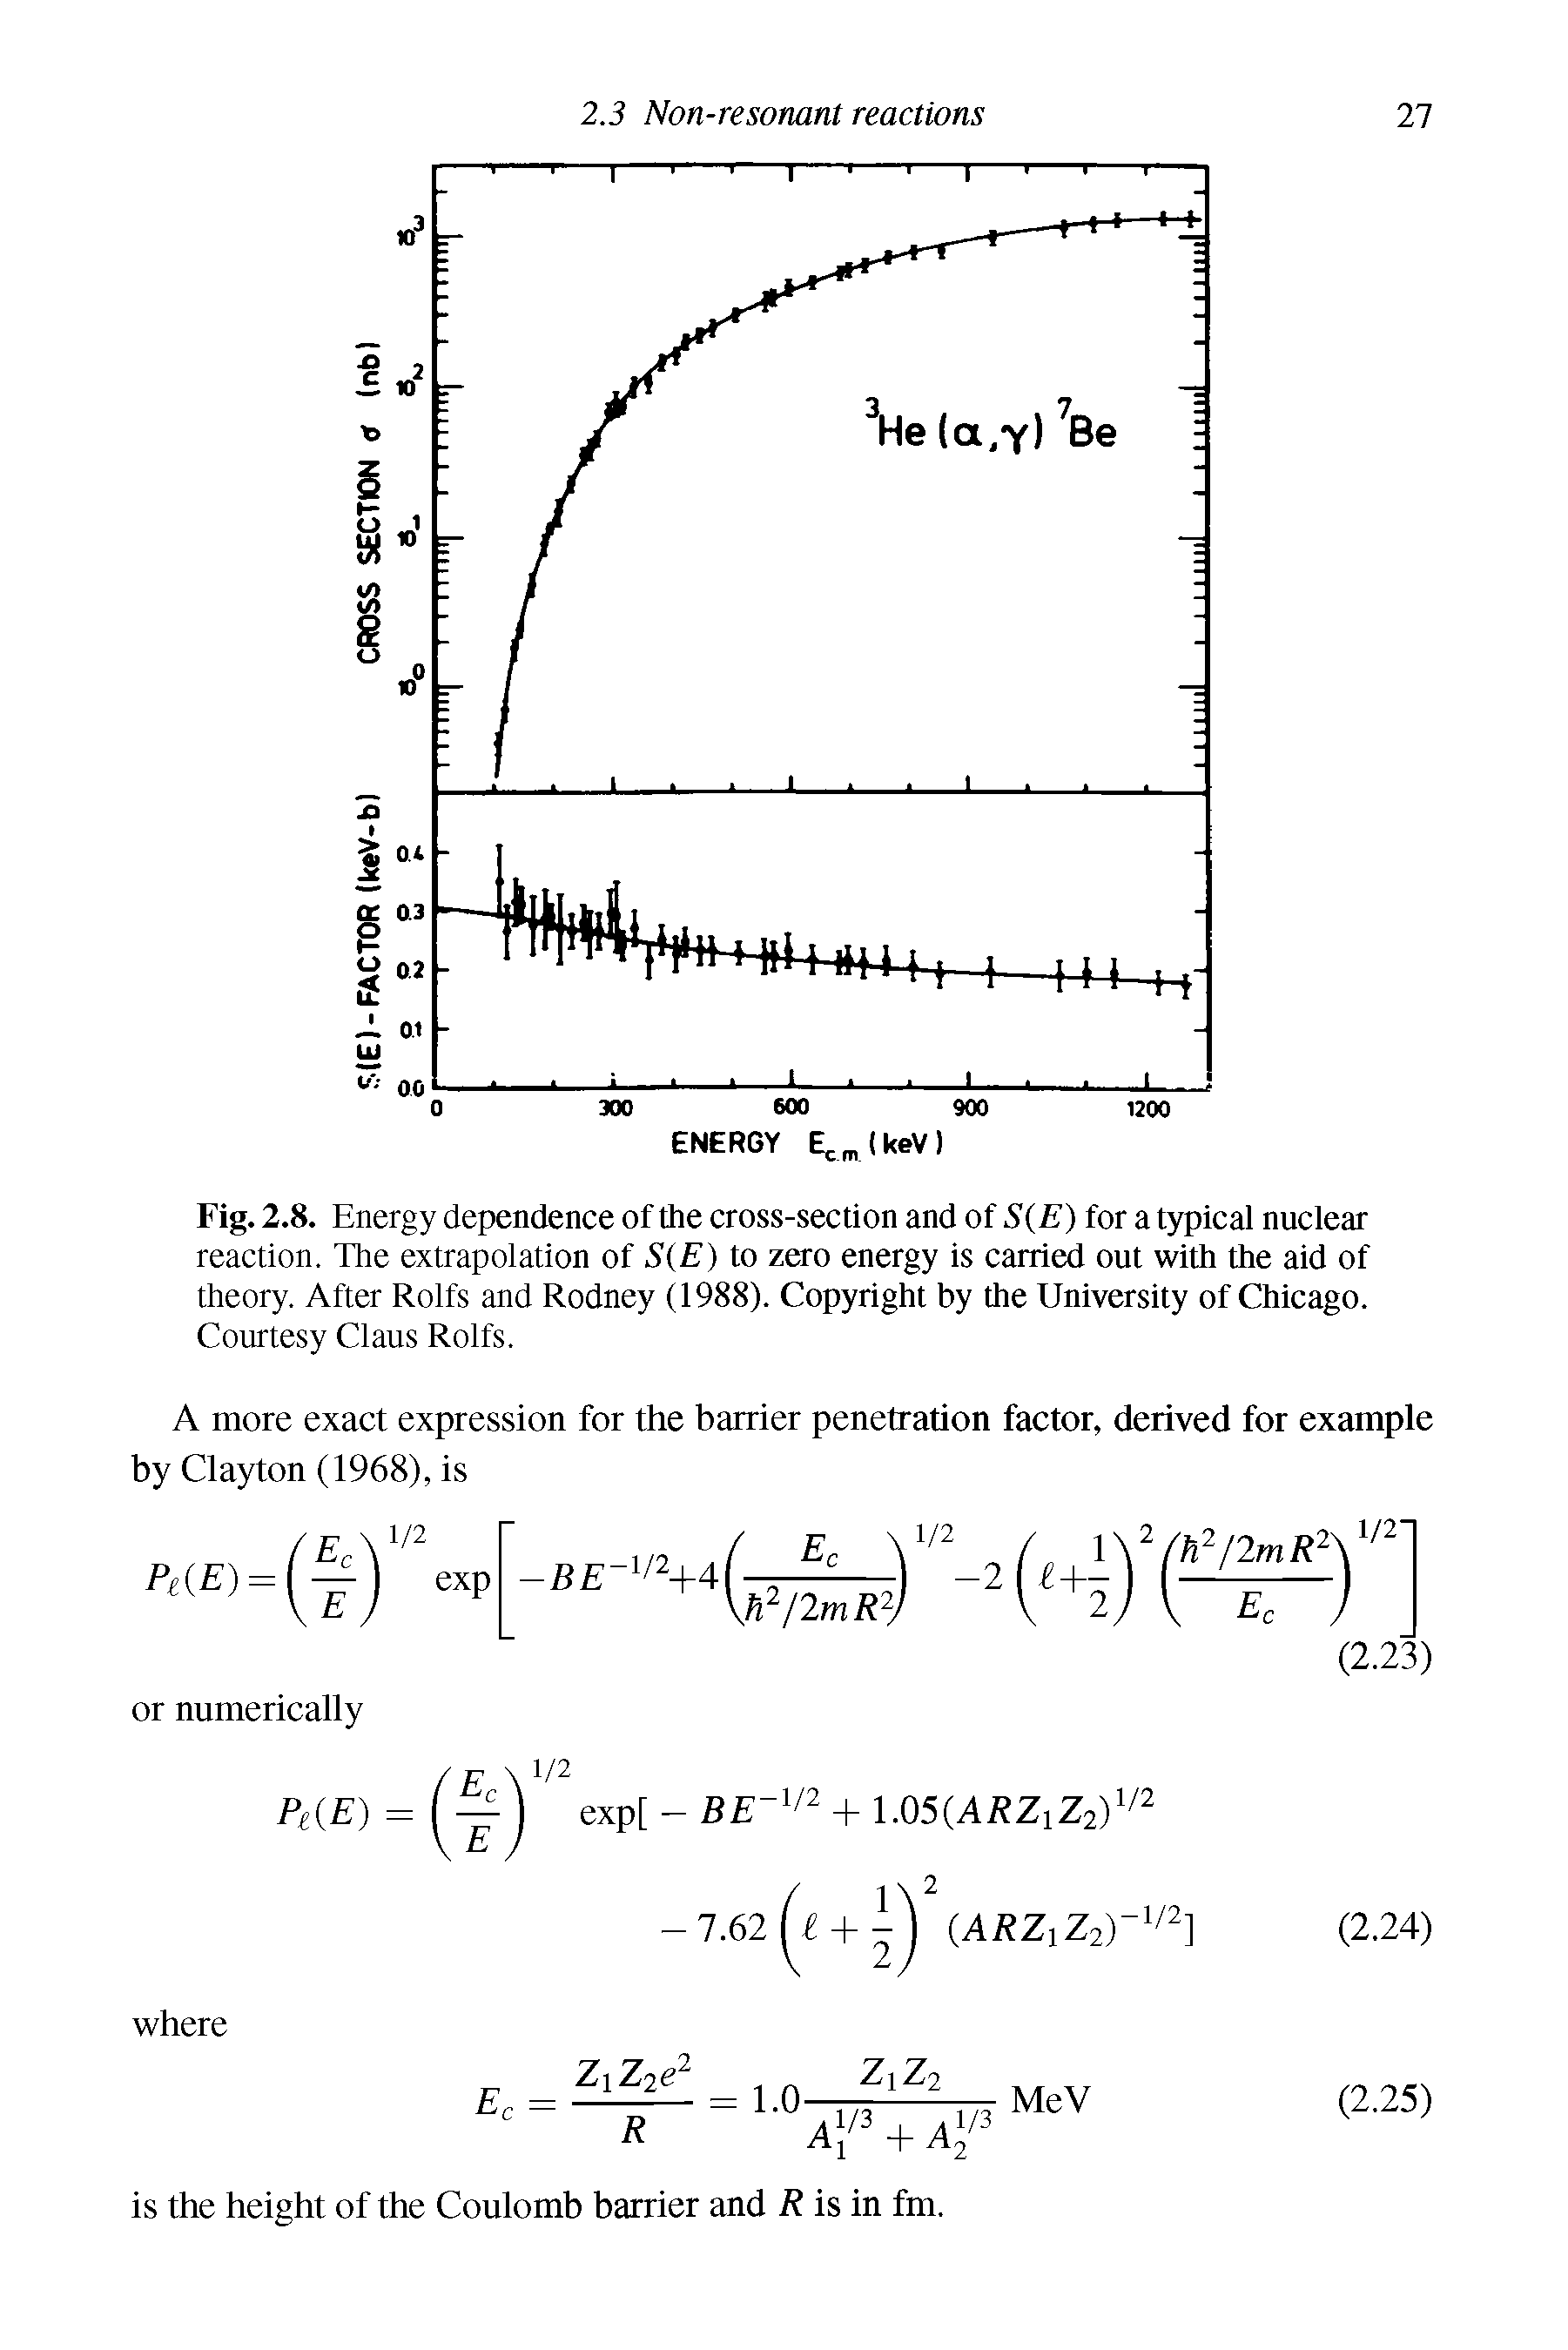 Fig. 2.8. Energy dependence of the cross-section and of S(E) for a typical nuclear reaction. The extrapolation of S(E) to zero energy is carried out with the aid of theory. After Rolfs and Rodney (1988). Copyright by the University of Chicago.